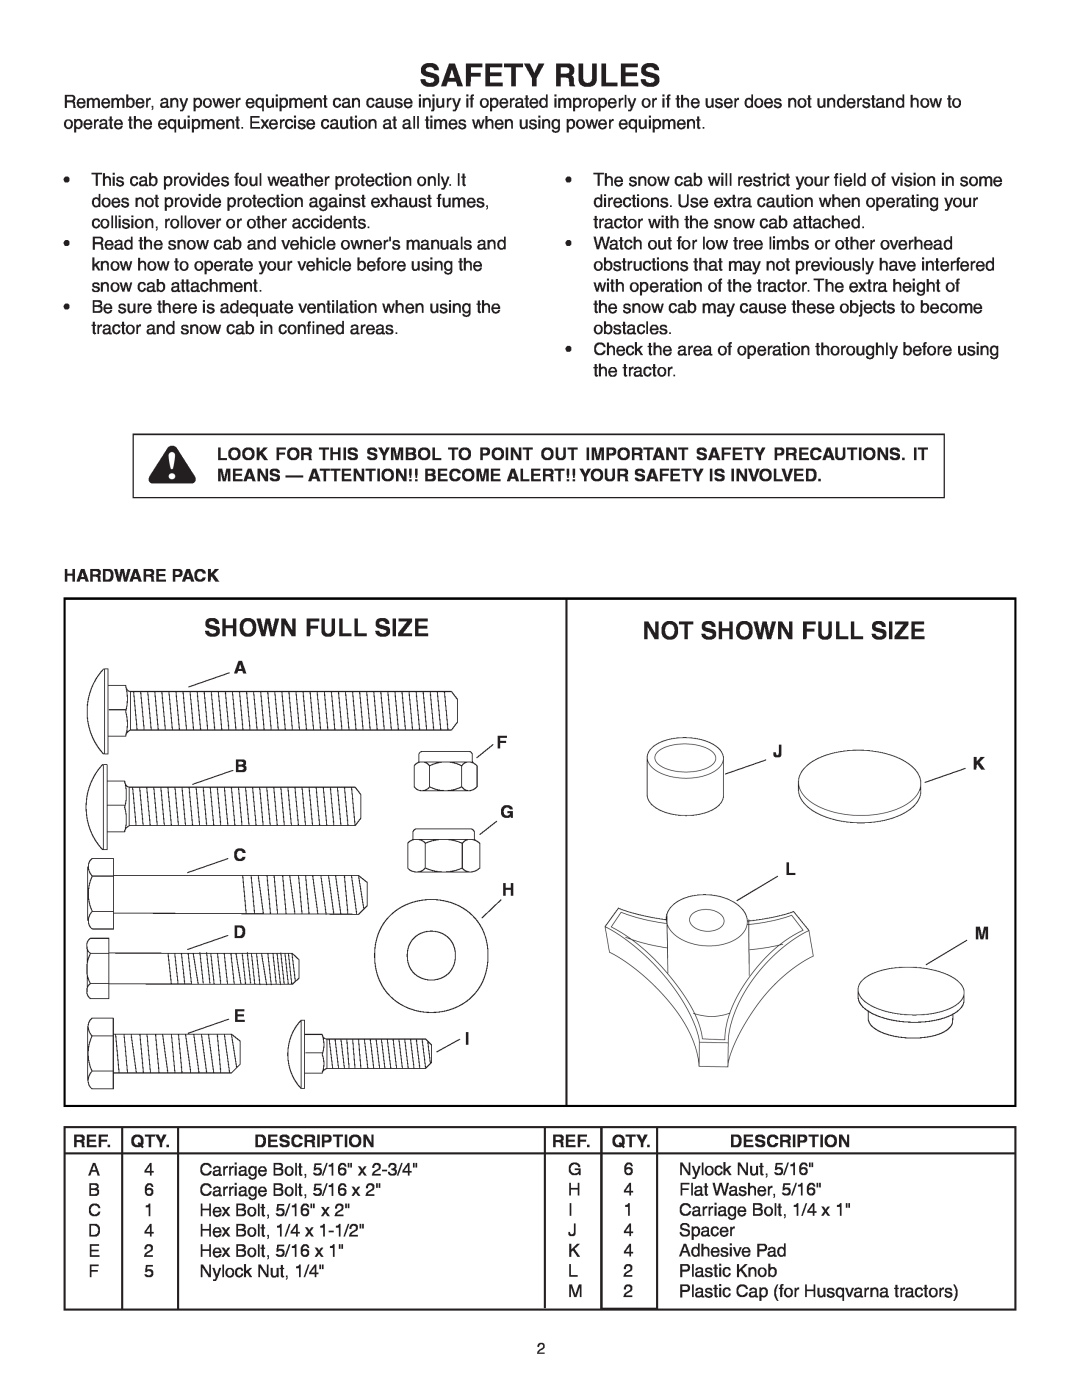 Agri-Fab 45-0402 manual Safety Rules, Not Shown Full Size 